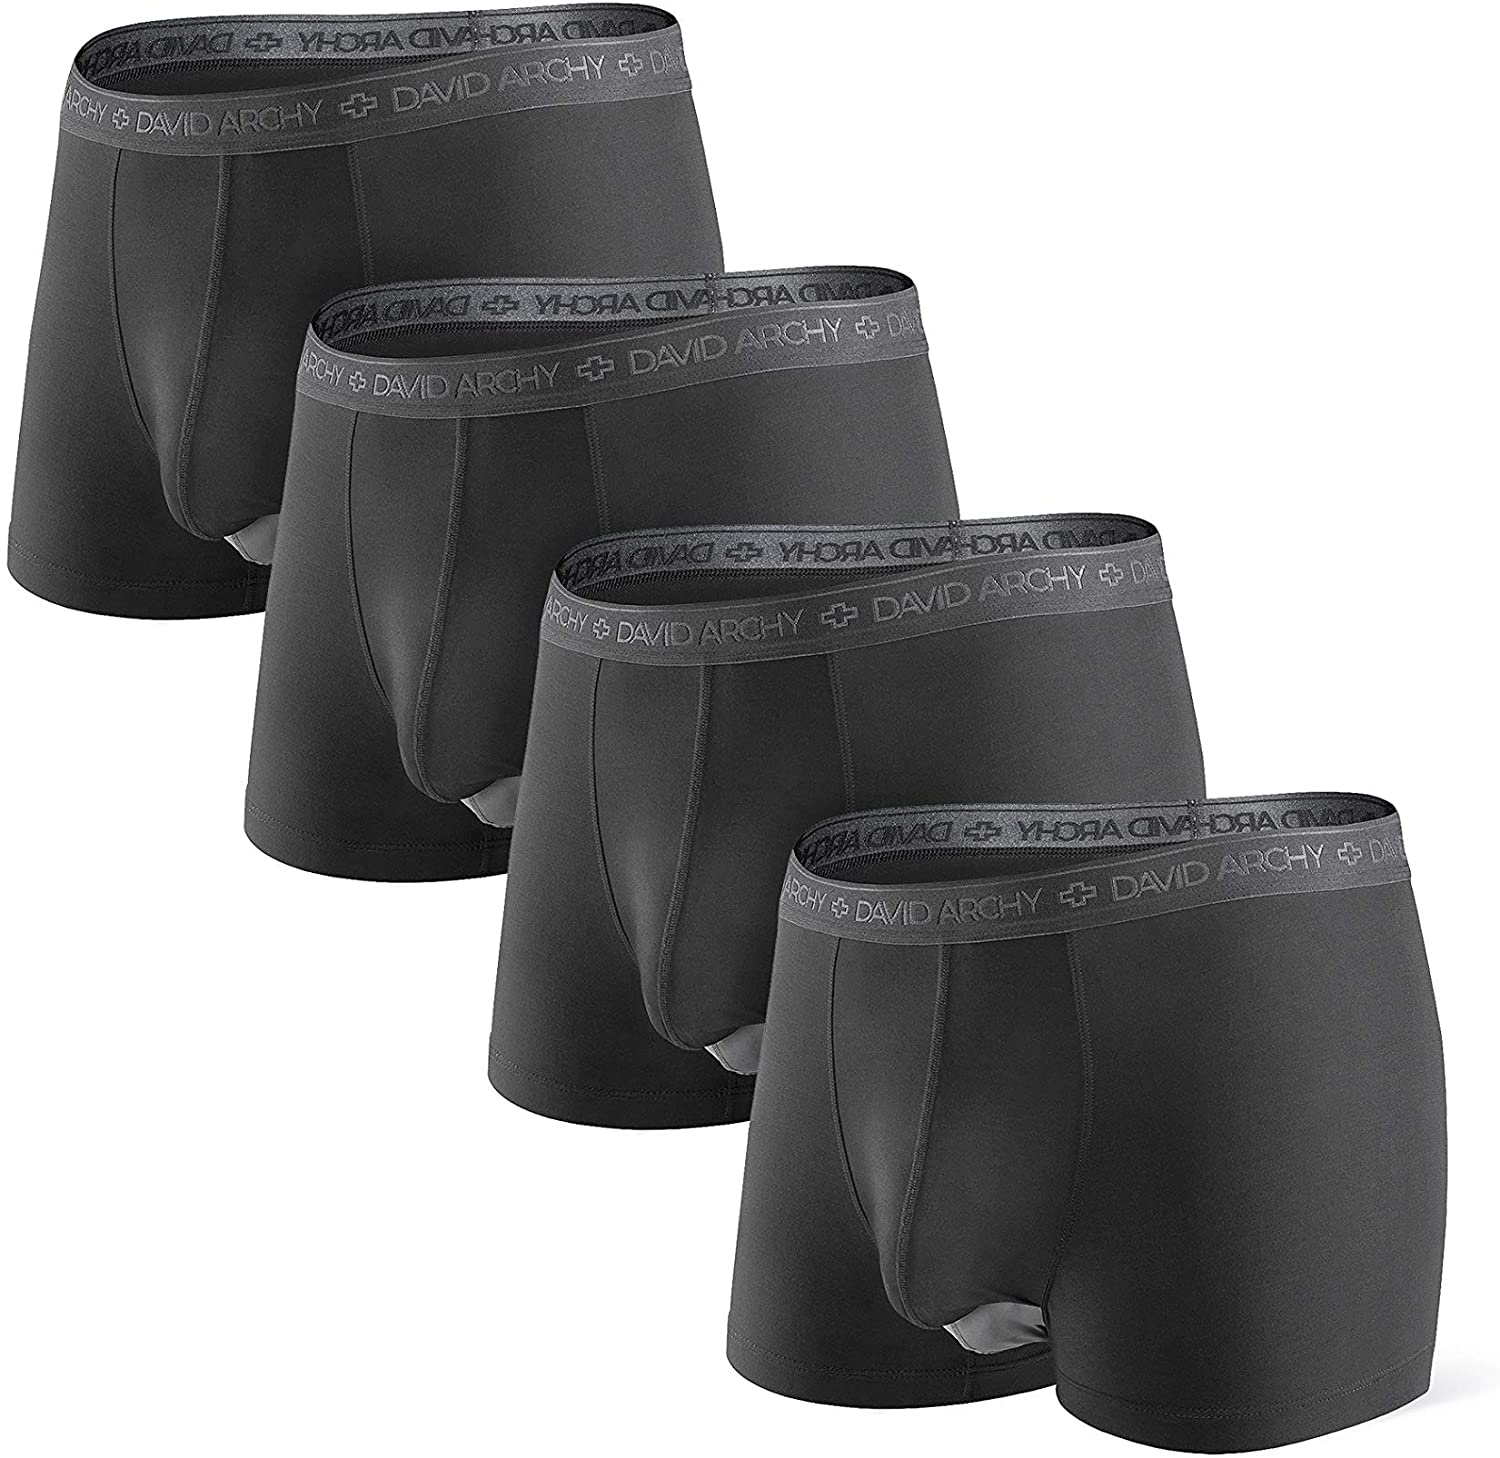 DAVID ARCHY Men's Micro Modal Dual Pouch Trunks Soft Separate Pouches Boxer  Briefs in 3 or 4 Pack, Black-6.5 in 3 Pack, L price in UAE,  UAE